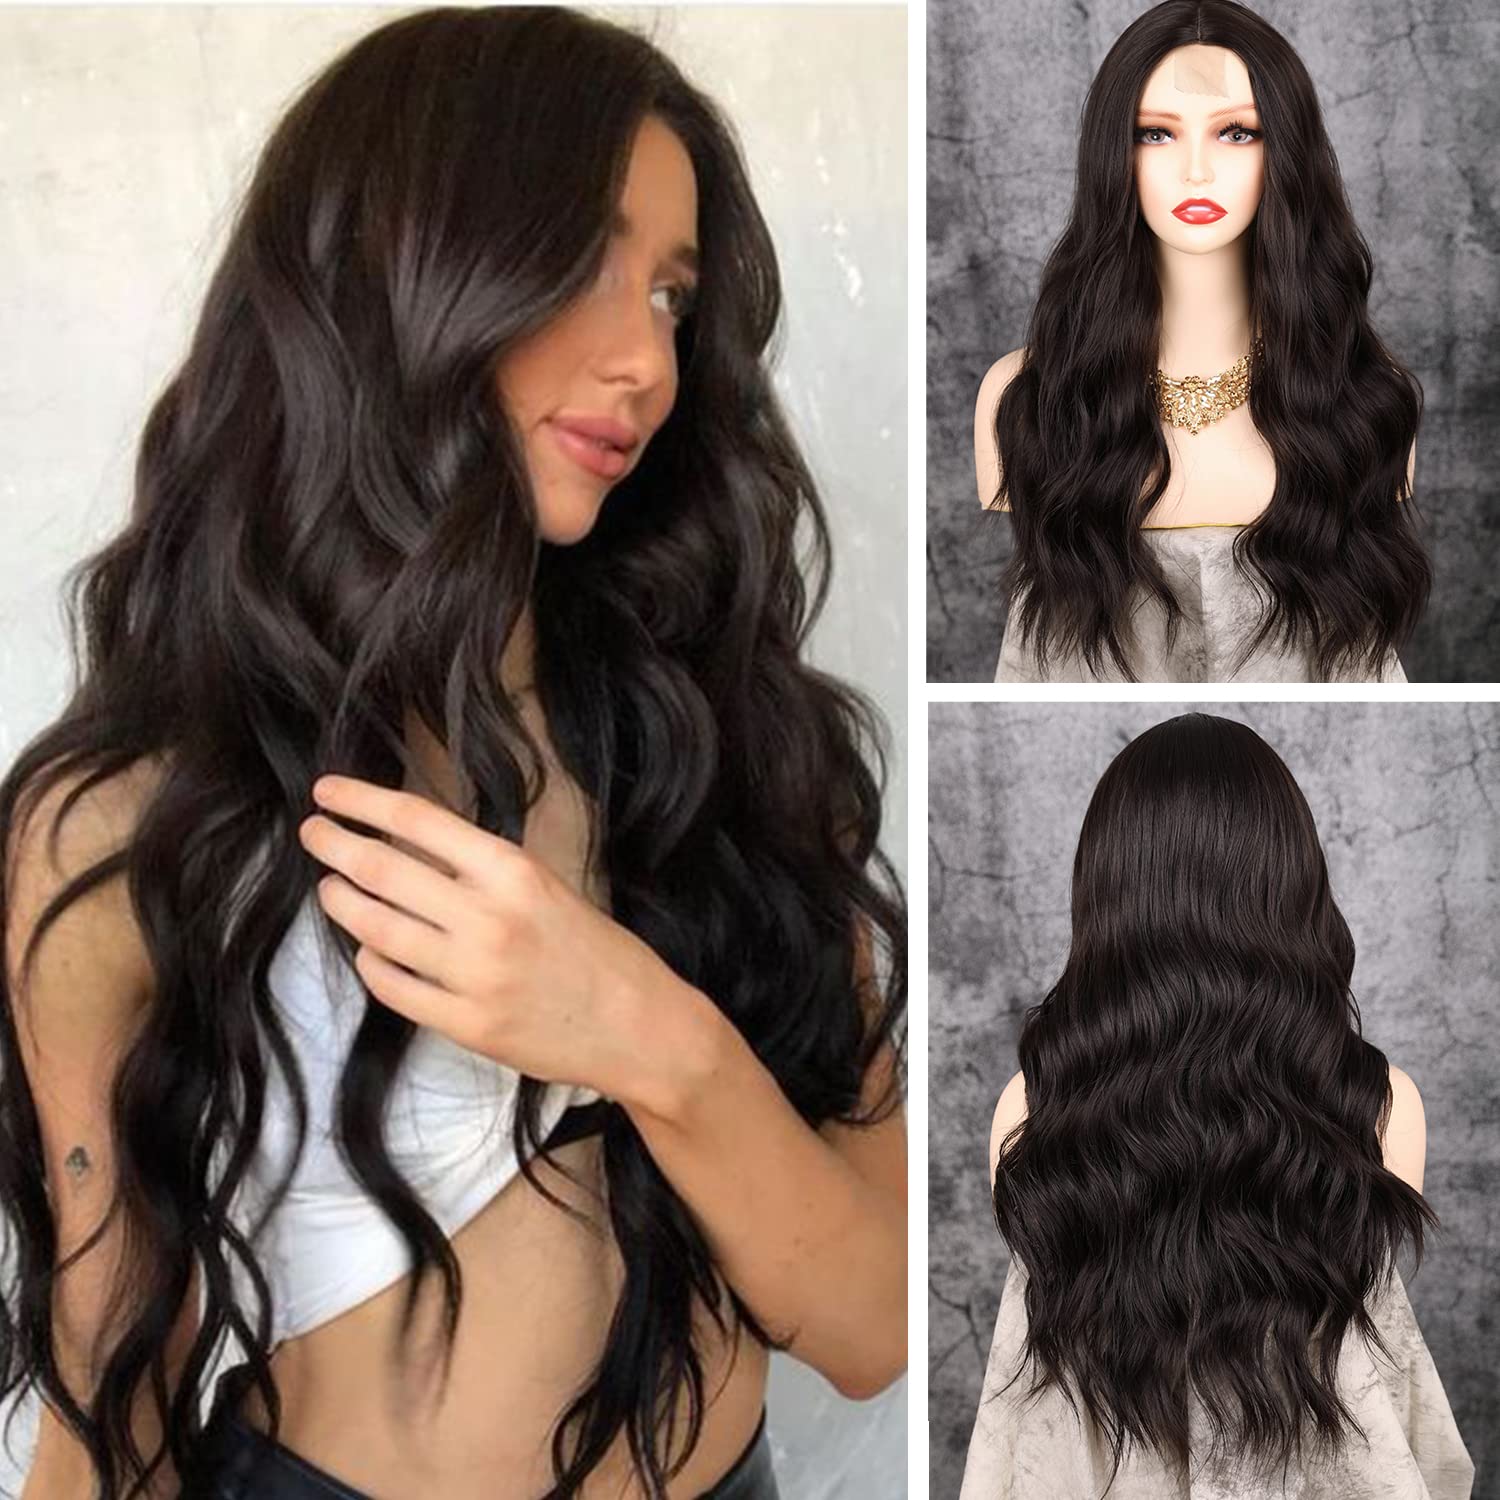 Long Wavy Wig for Women Middle Part Long Curly Ombre Brown Wig Synthetic Hair Replacement Wigs Natural Looking Dark Roots Heat Resistant Fiber for Daily Party Use